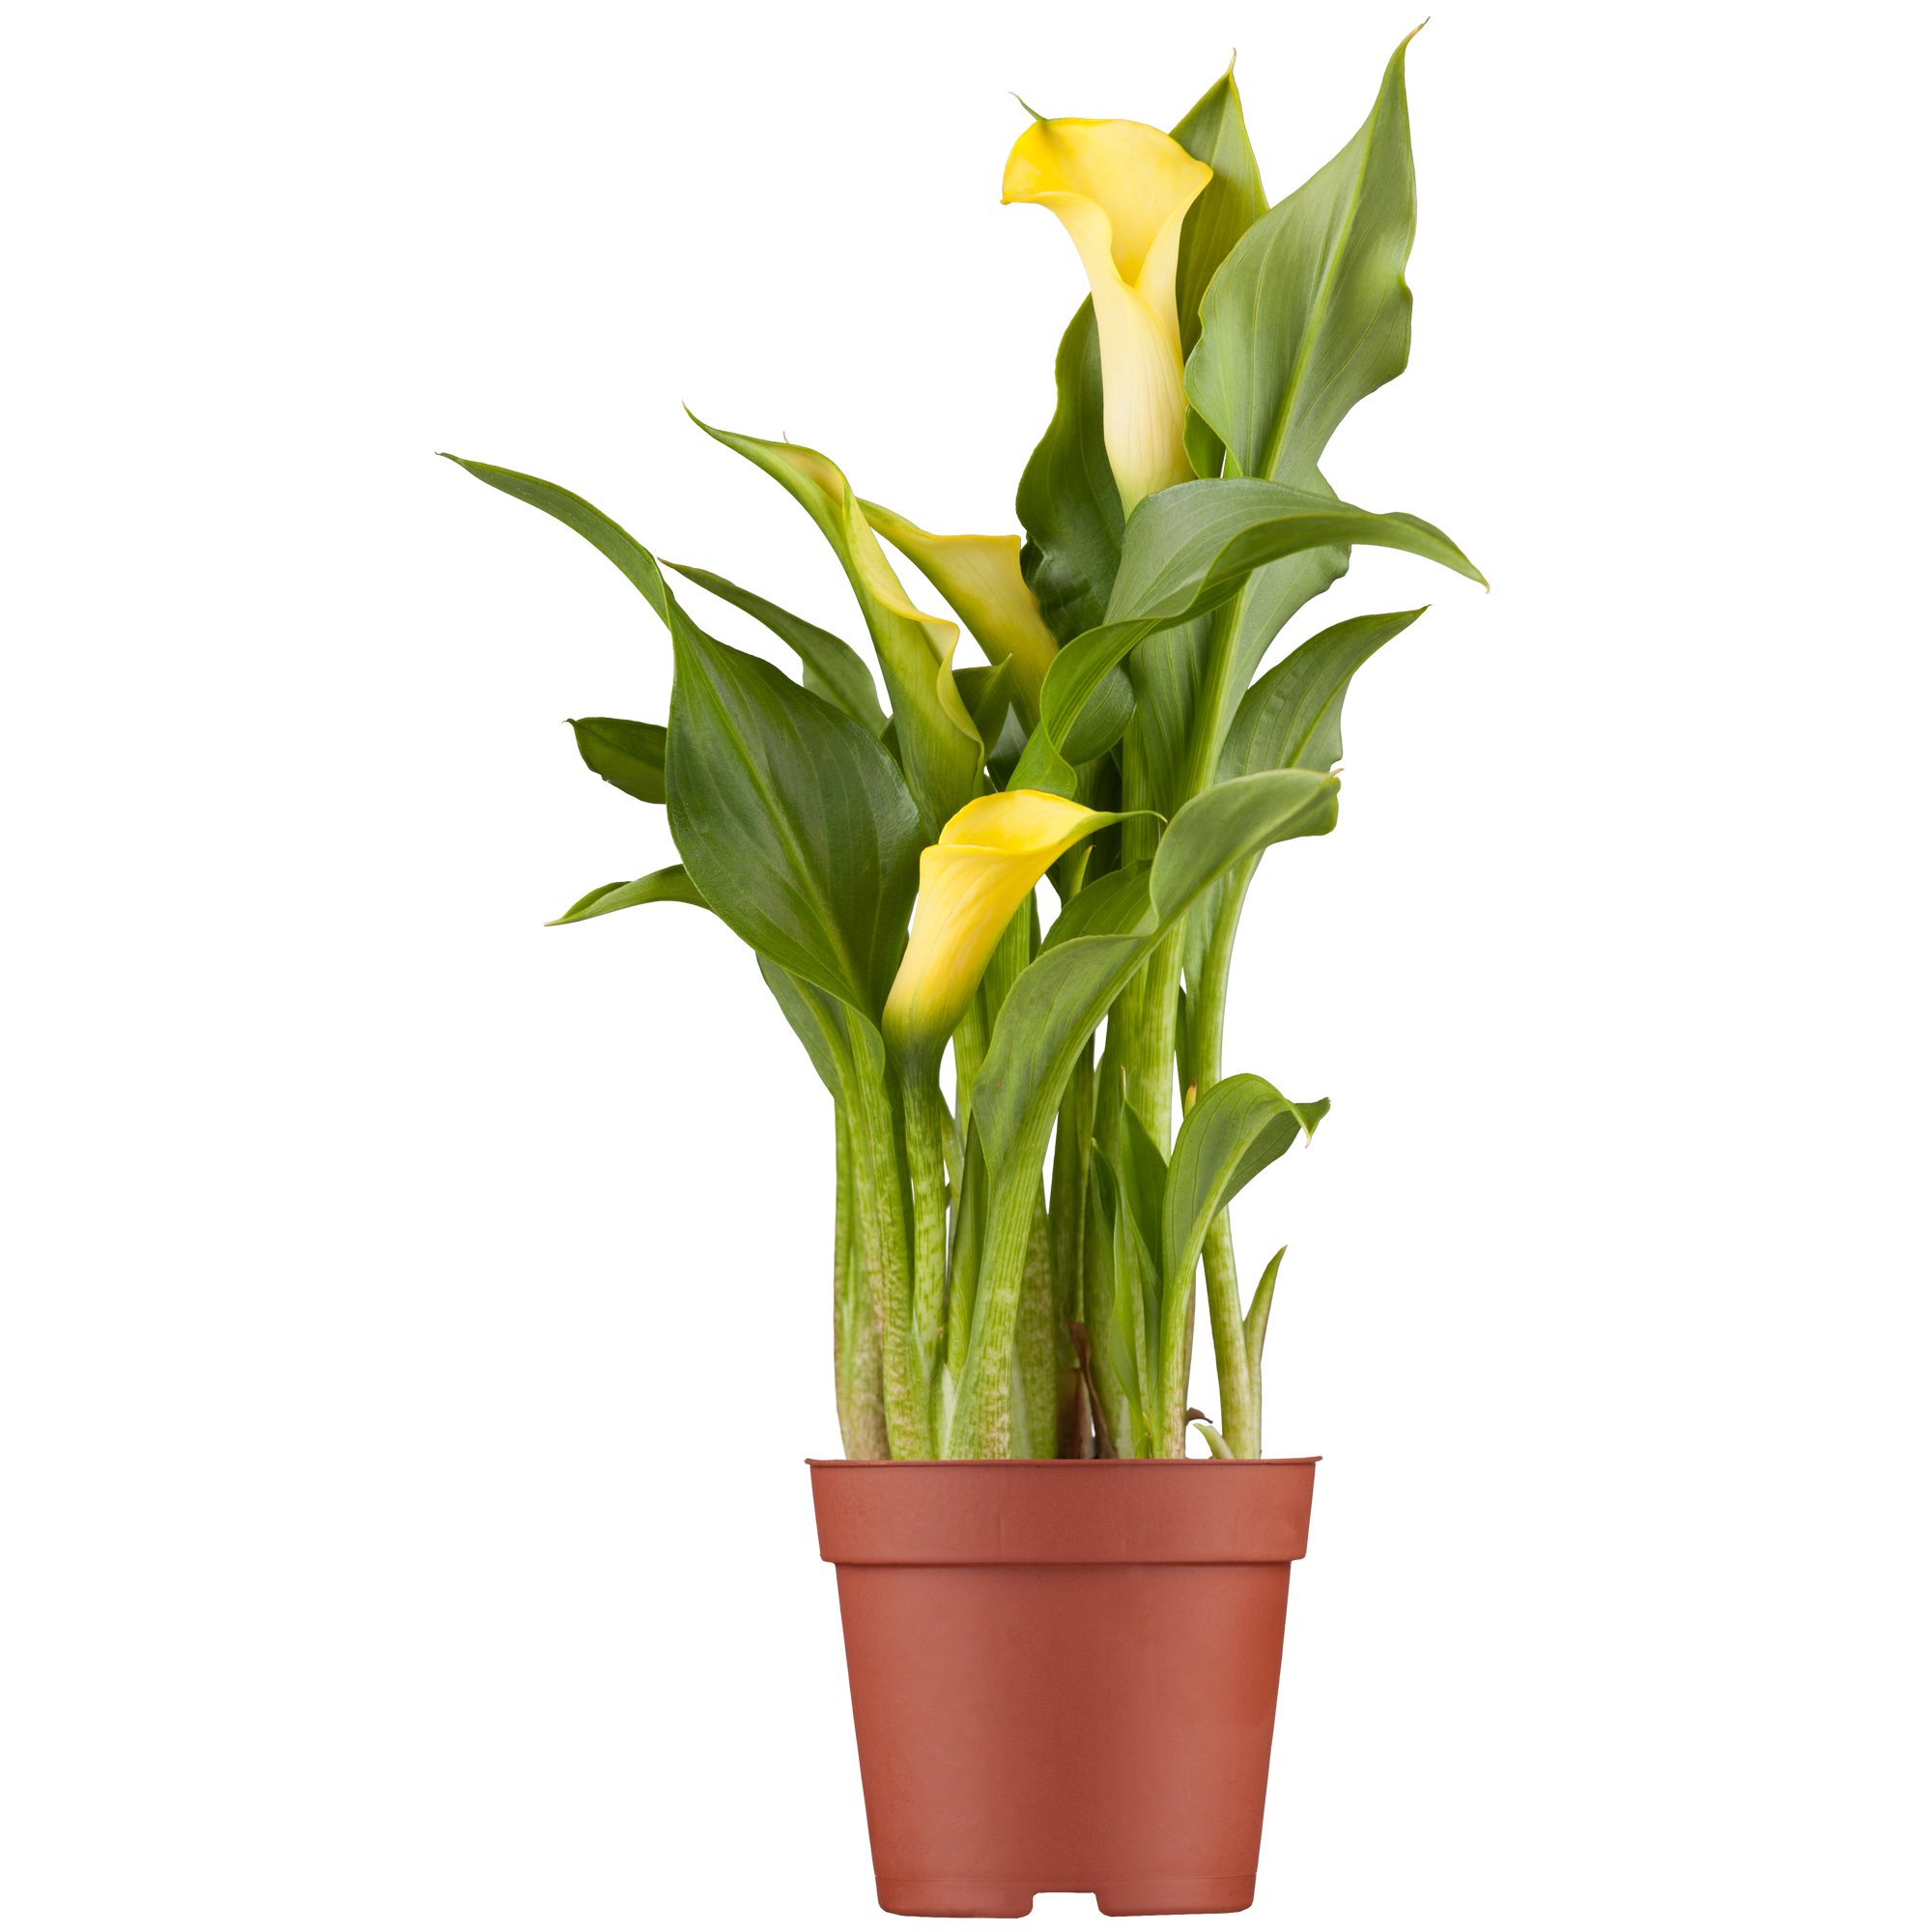 Zimmer-Calla gelb, 13 cm Topf + product picture